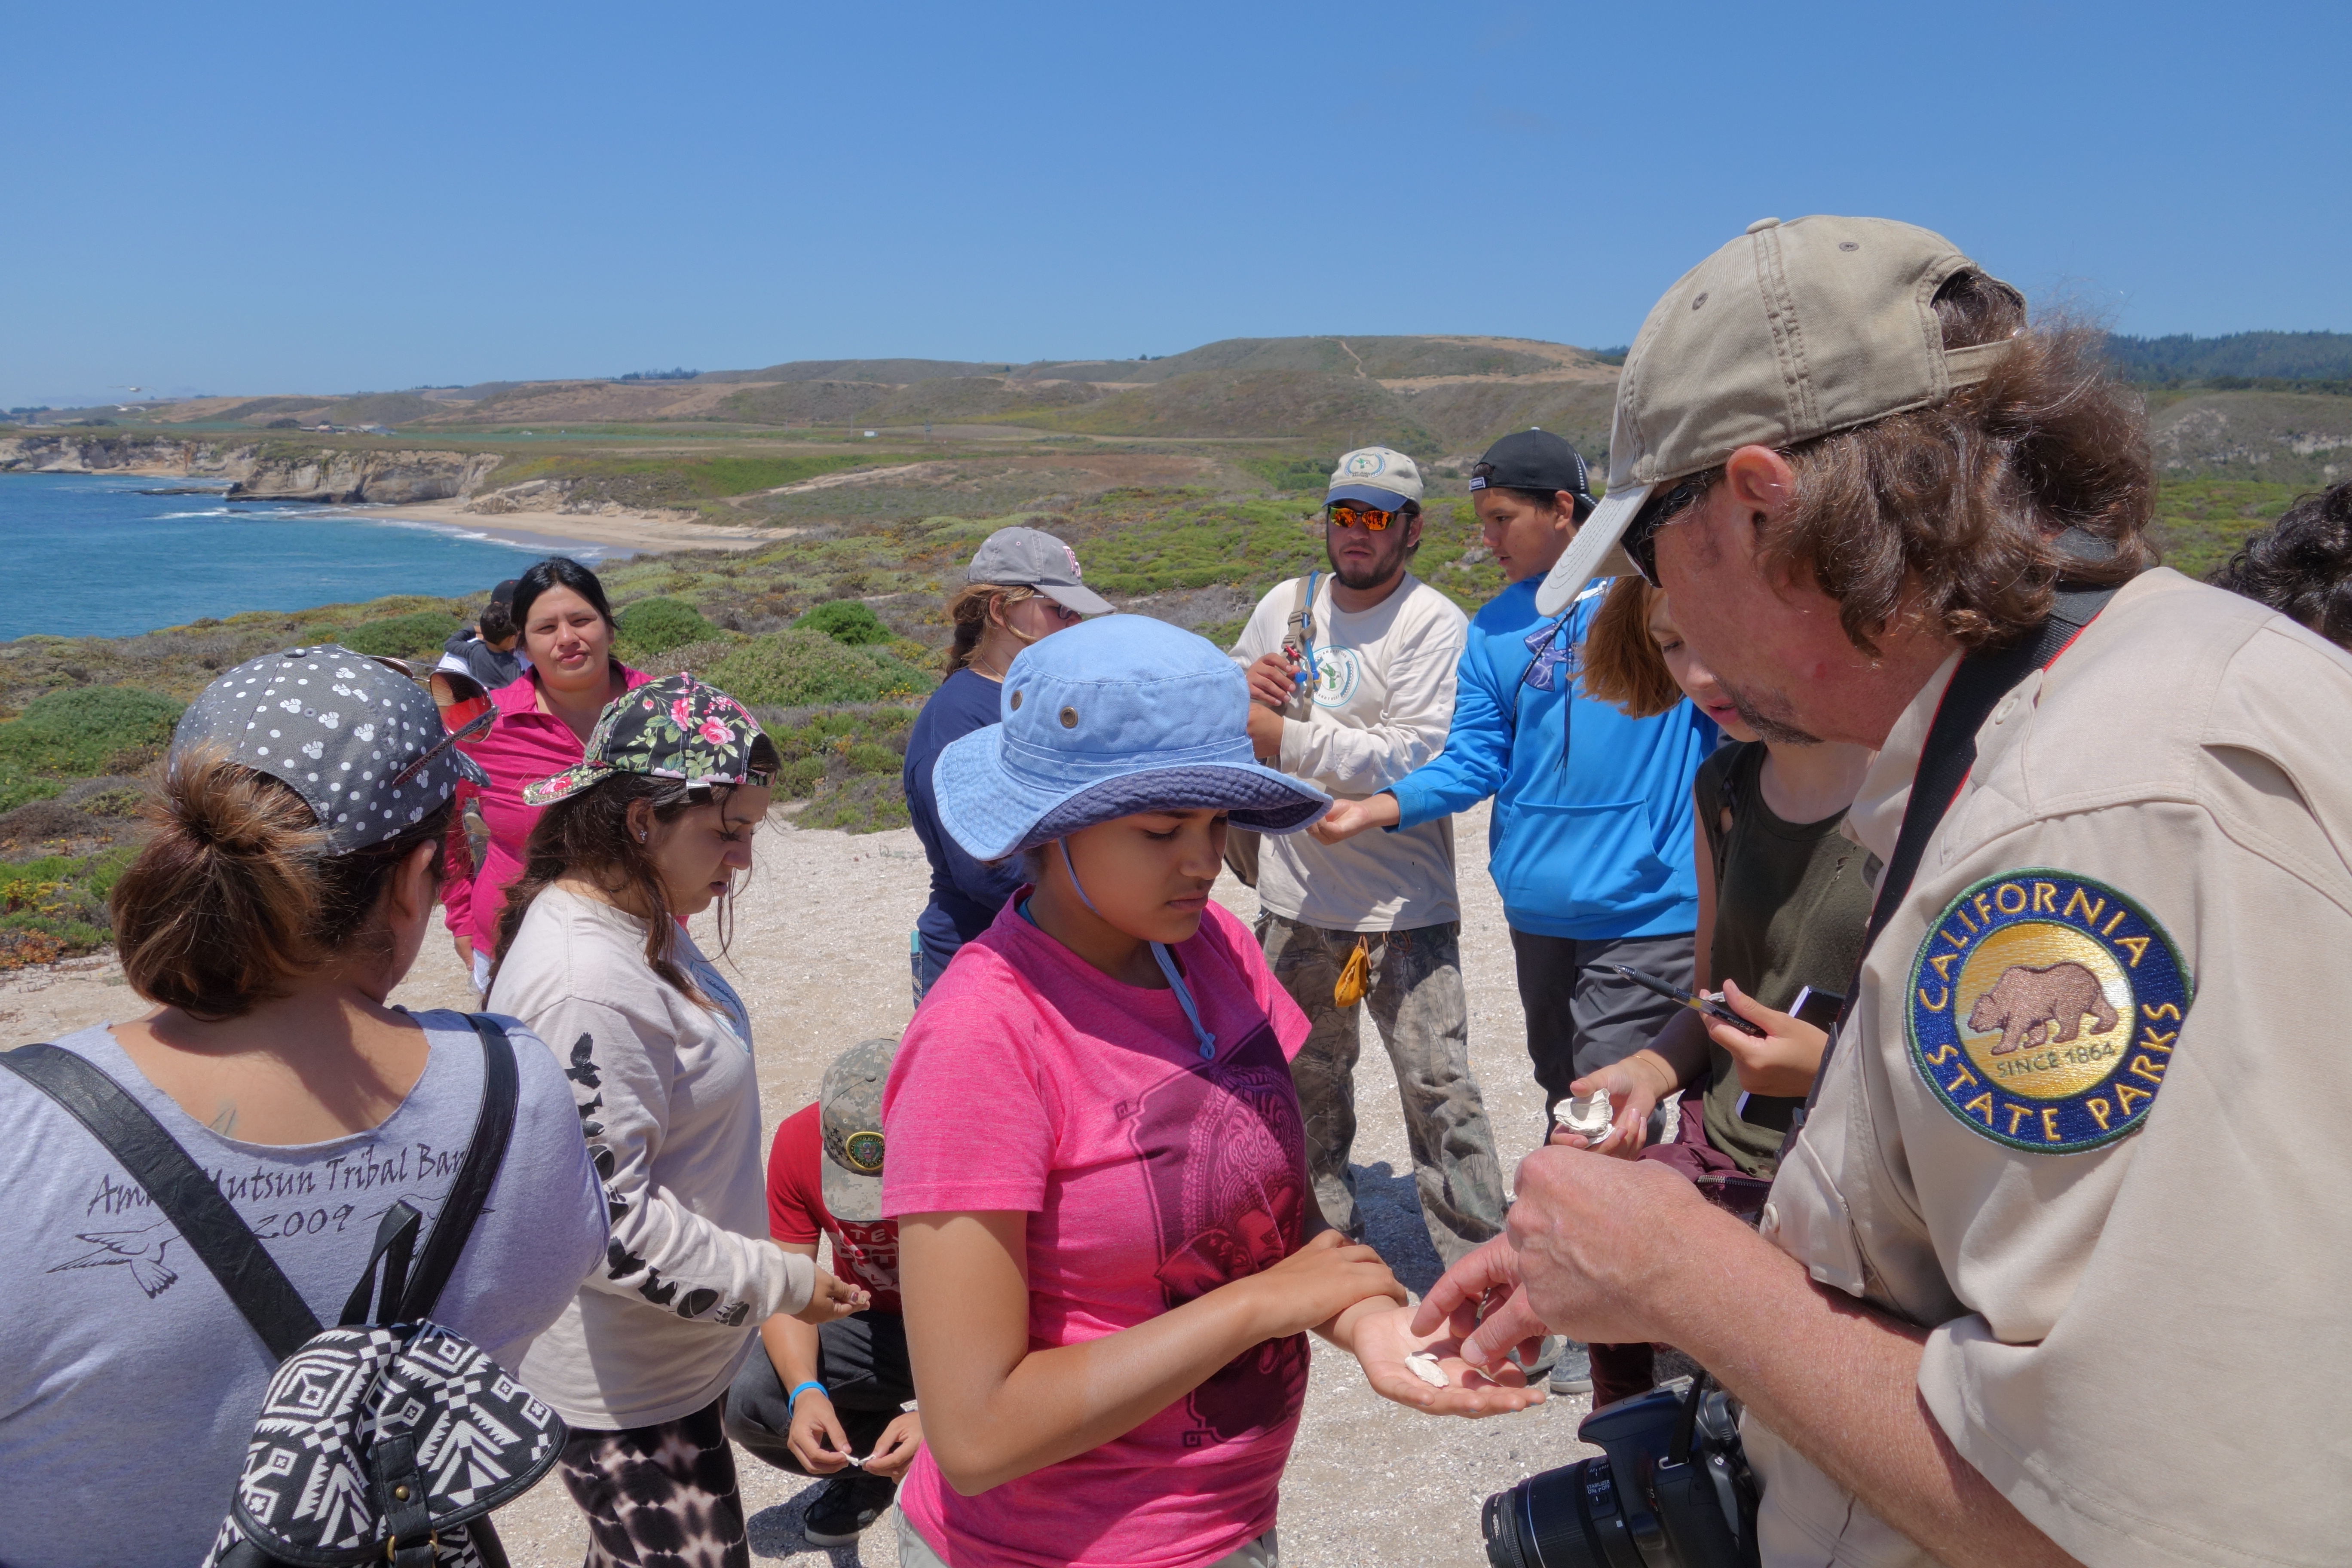 Campers visited and worked to protect Amah Mutsun archaeological sites. Here Mark Hylkema, State Parks archaeologist, describes an artifact. Photo courtesy Cat Wilder.